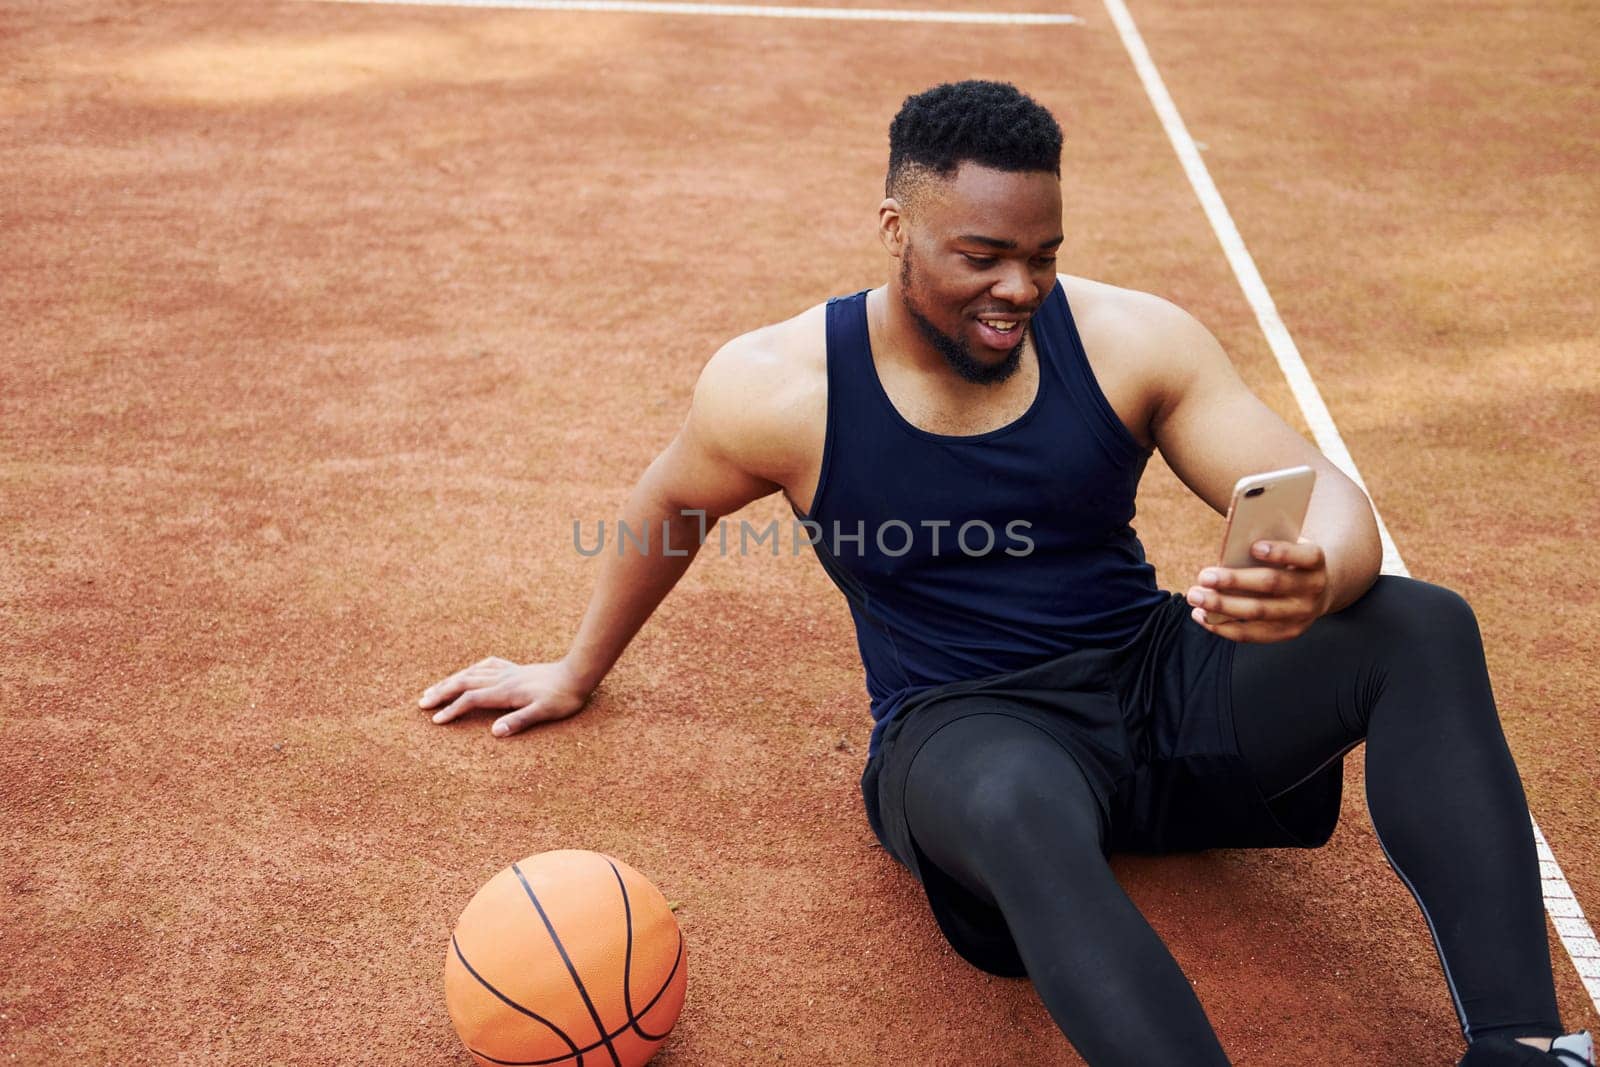 Using phone. African american man plays basketball on the court outdoors.